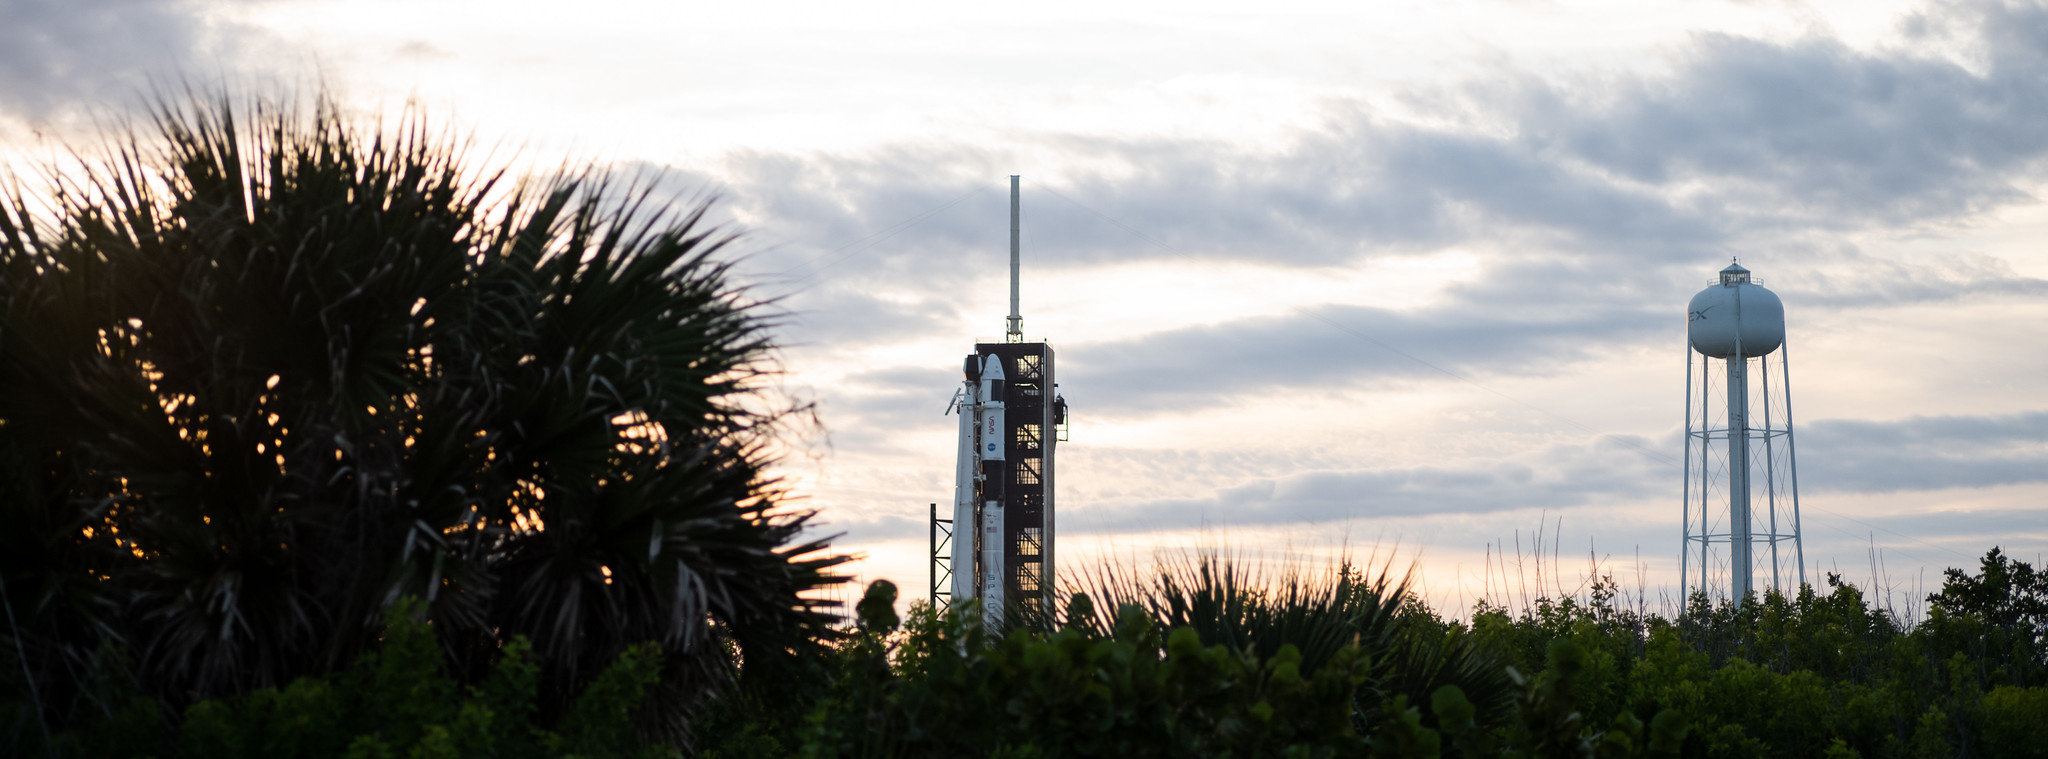 A SpaceX Falcon 9 rocket with the company's Crew Dragon spacecraft onboard is seen on the launch pad at Launch Complex 39A as preparations continue for the Crew-3 mission, Monday, Nov. 1, 2021, at NASA’s Kennedy Space Center in Florida.